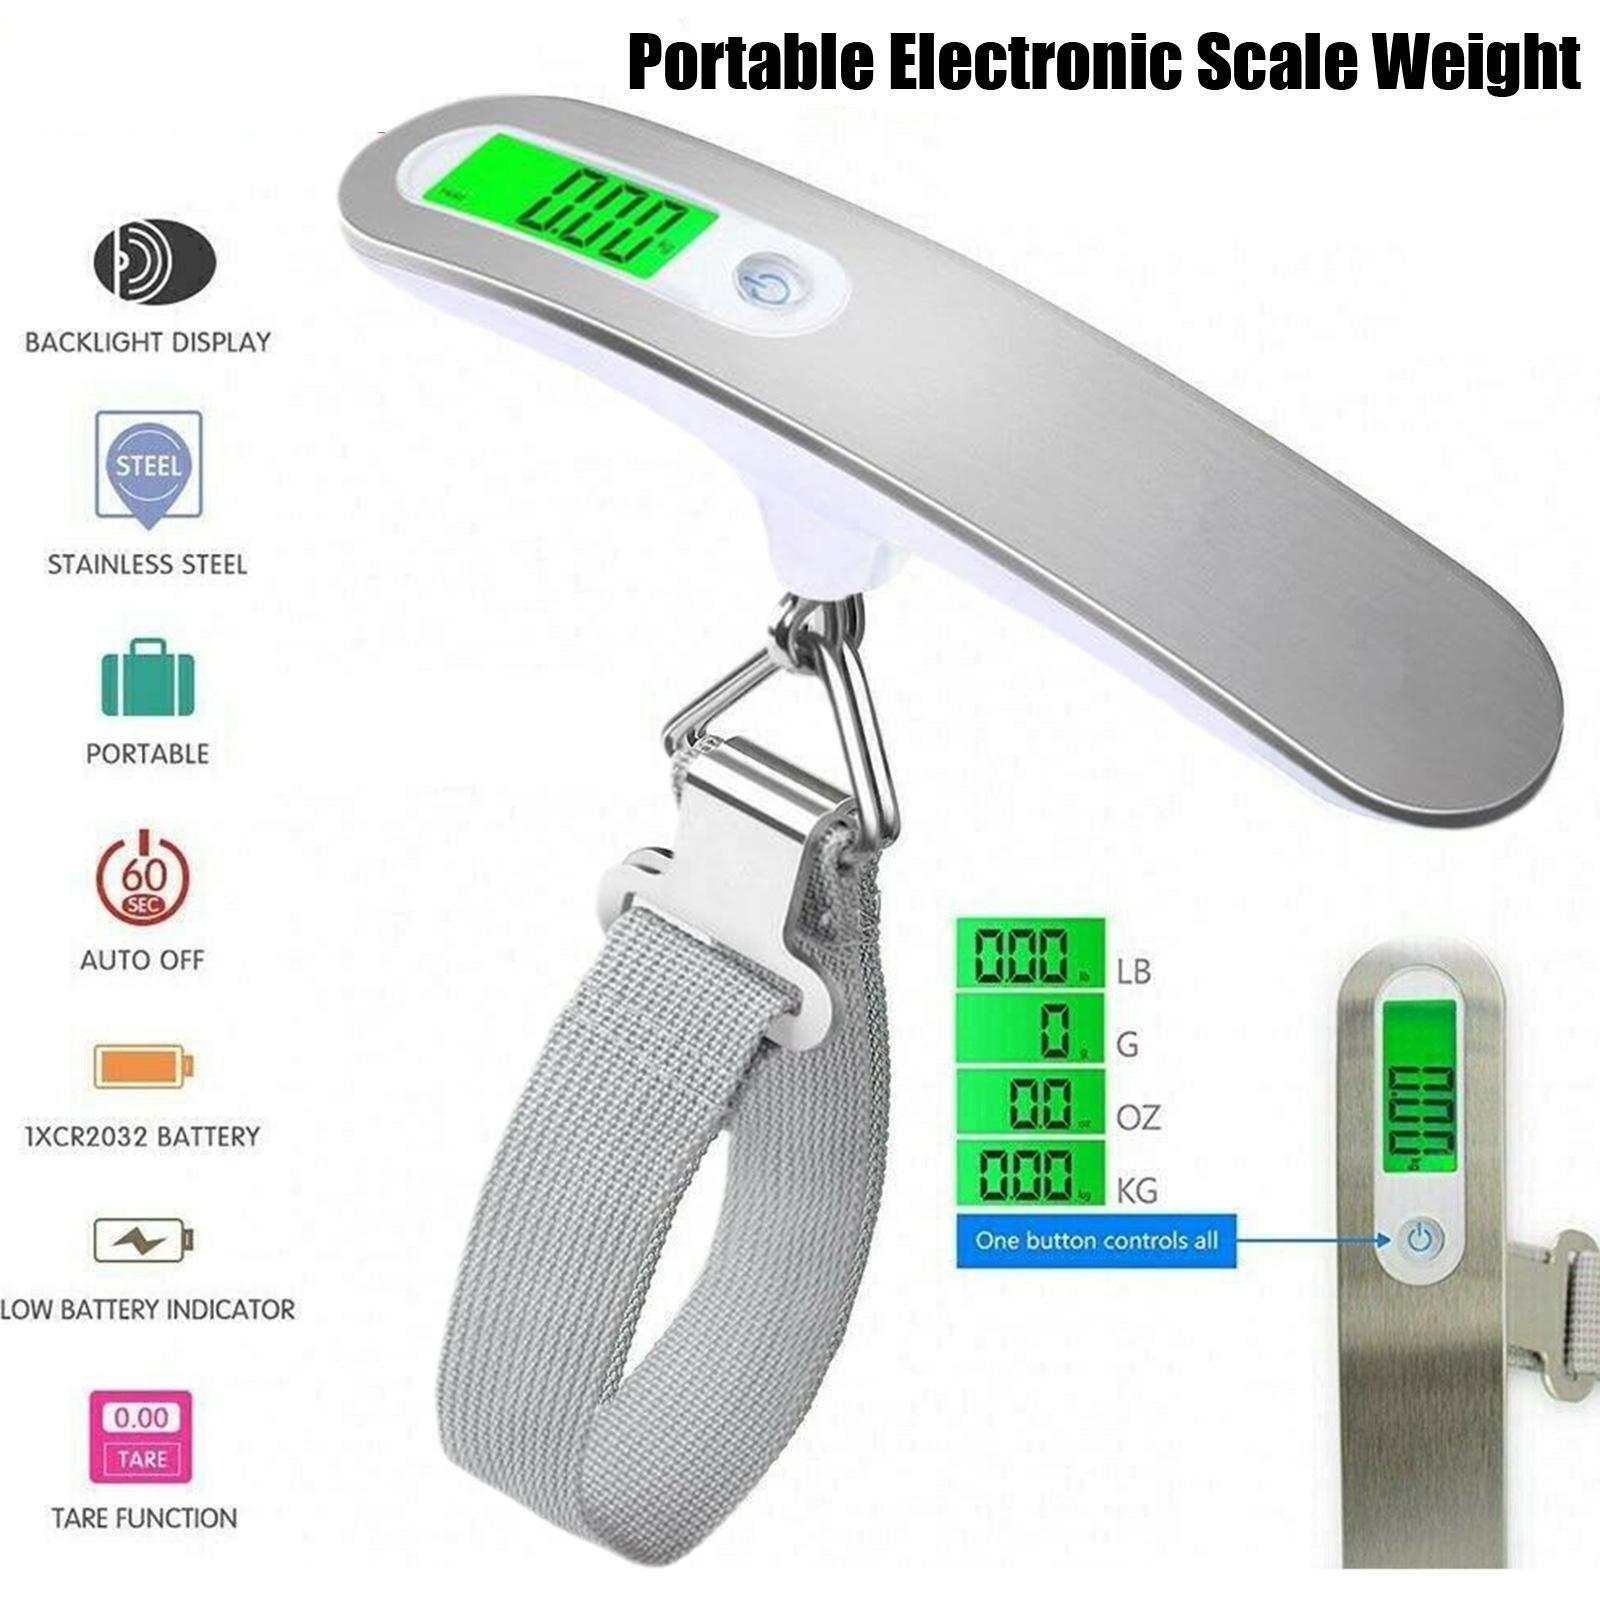 Portable Electronic Scale Digital Hand Luggage Electronic Hot Sale Scale O2z6